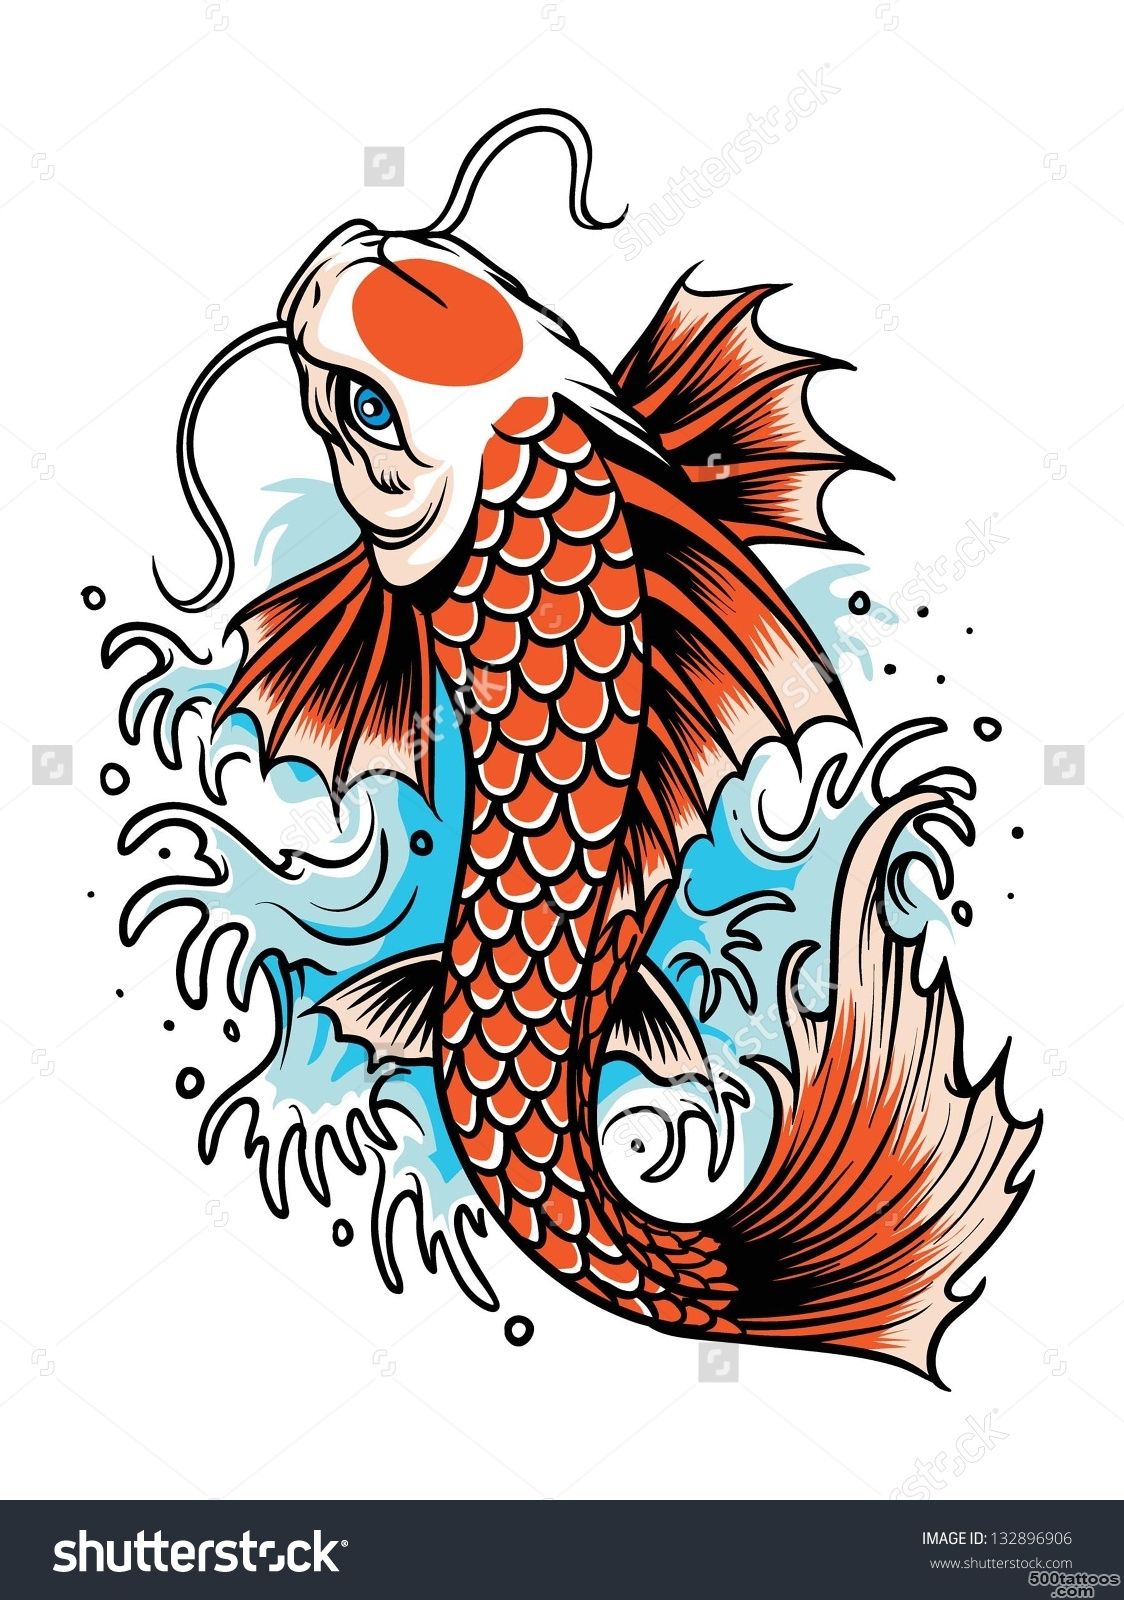 Koi Fish Tattoo Stock Photos, Images, amp Pictures  Shutterstock_49